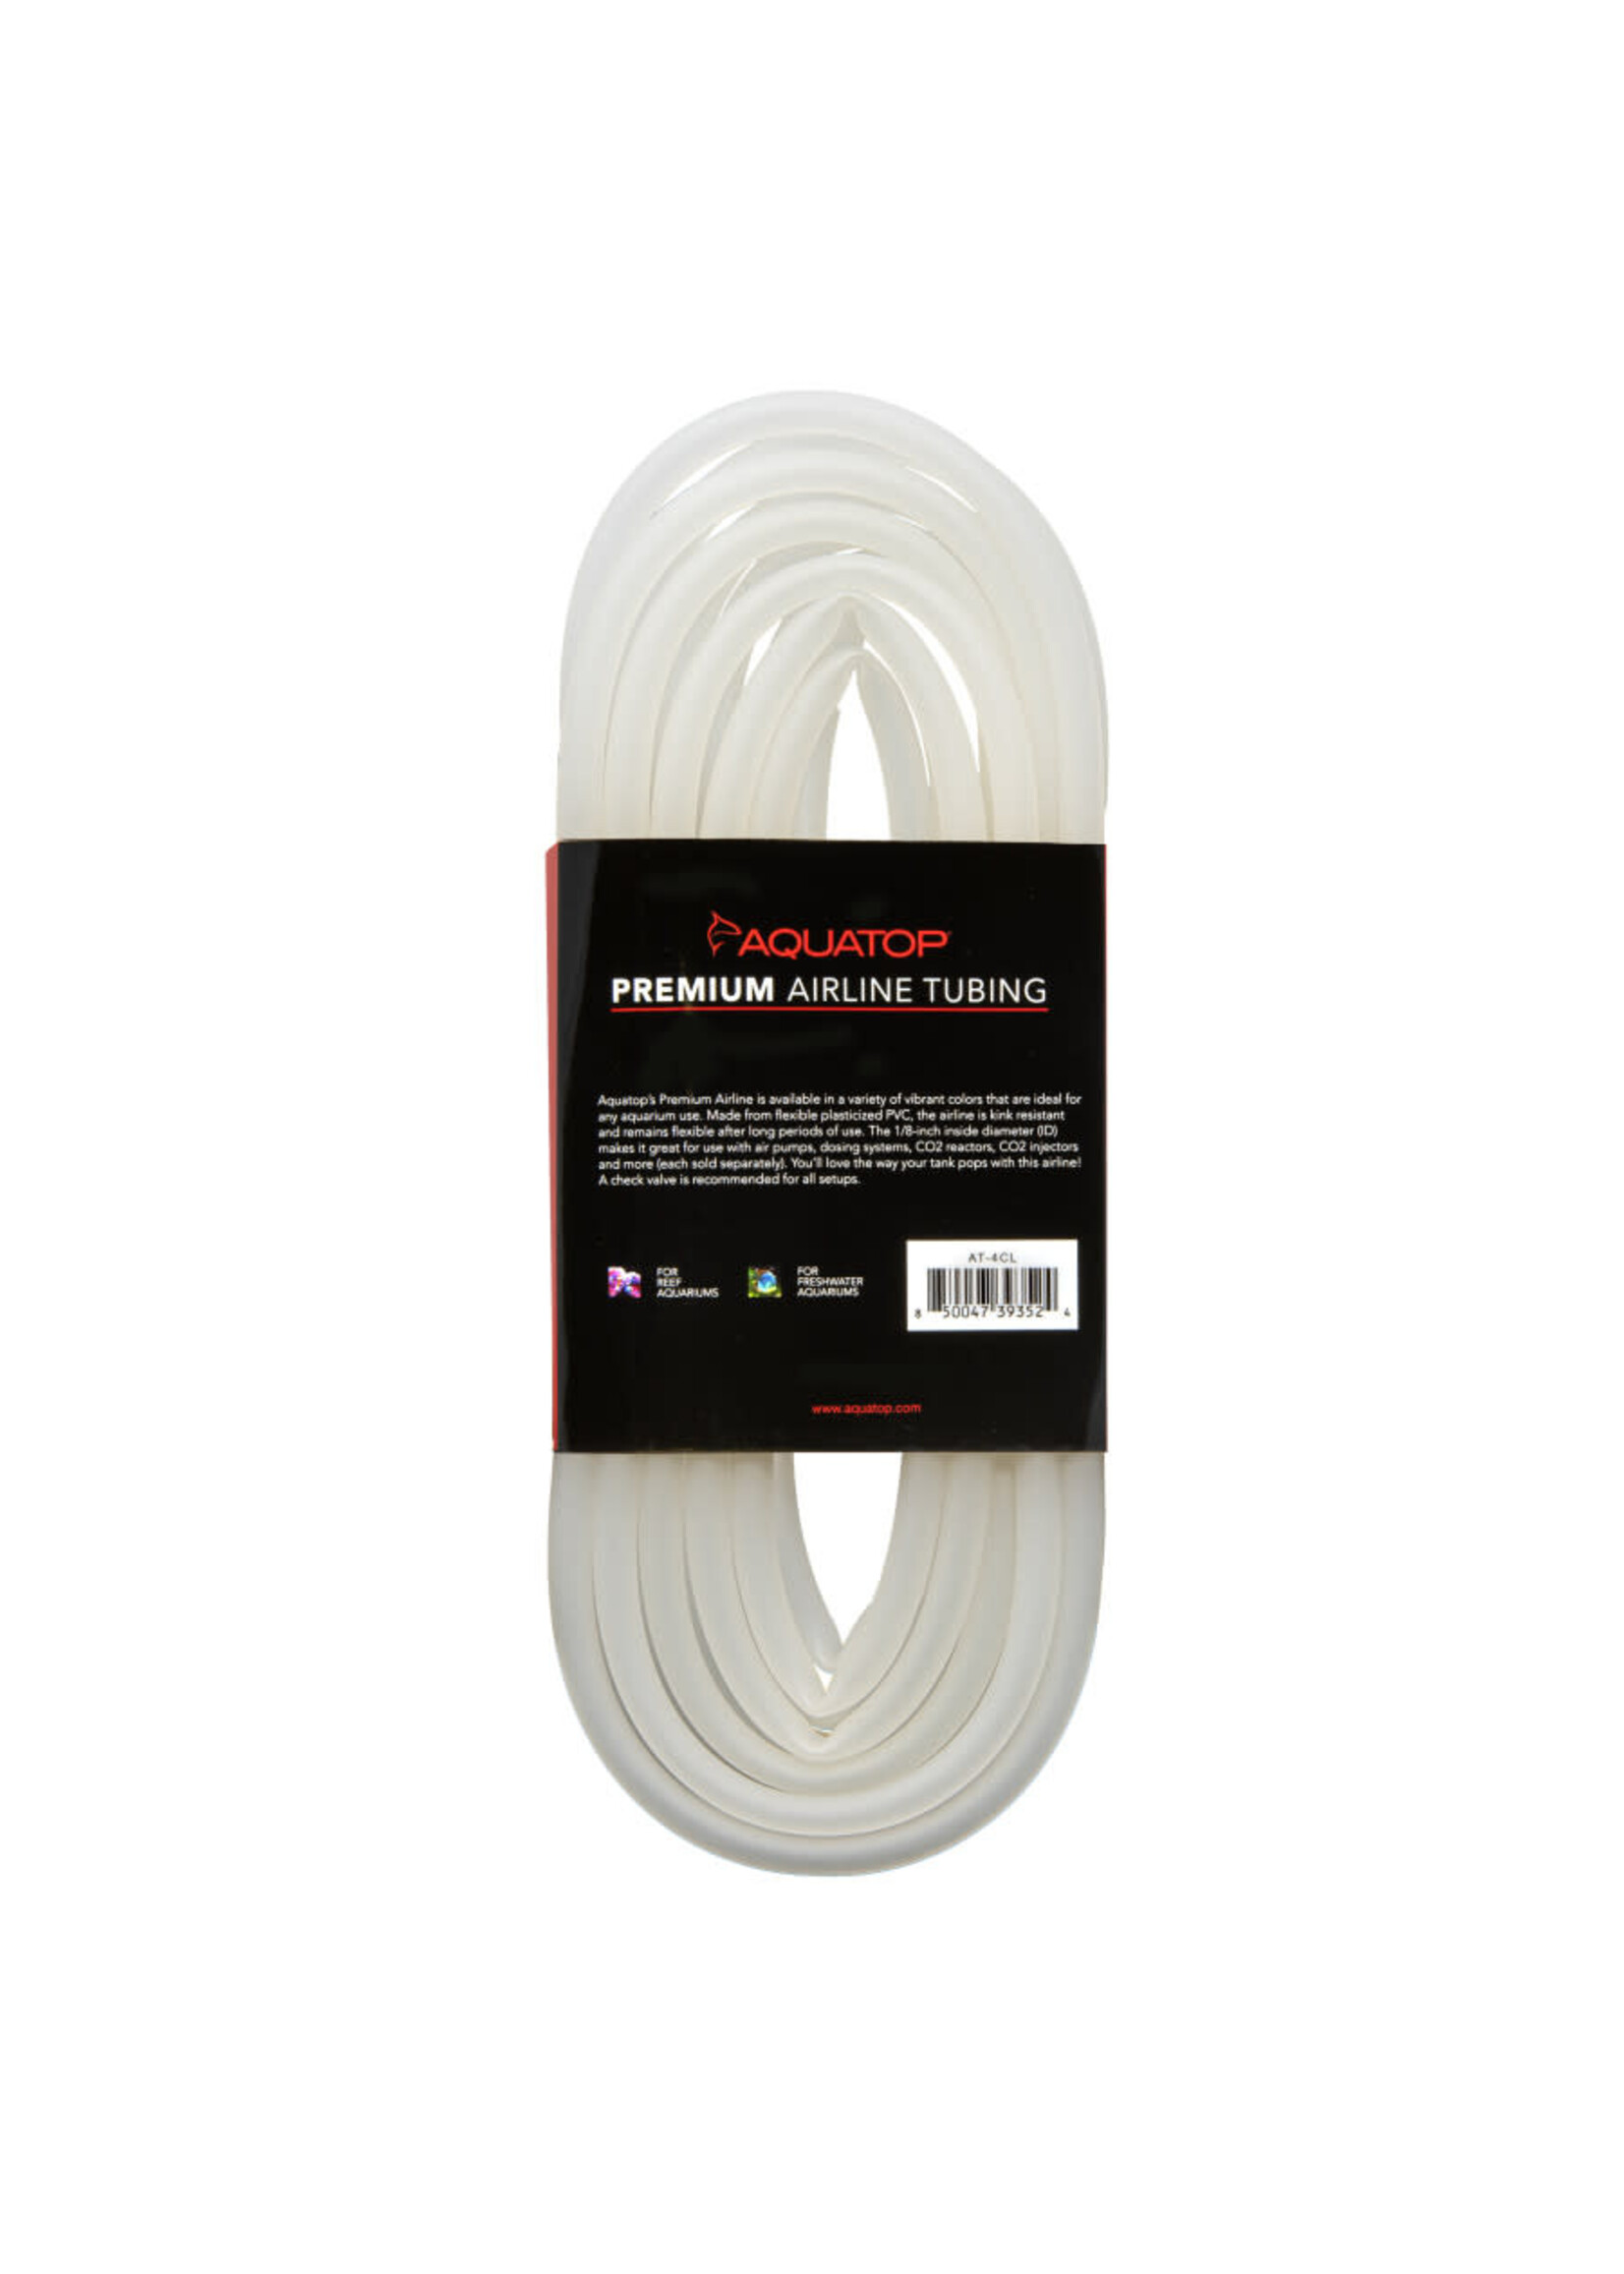 Aquatop AIRLINE TUBING CLEAR 13 FT